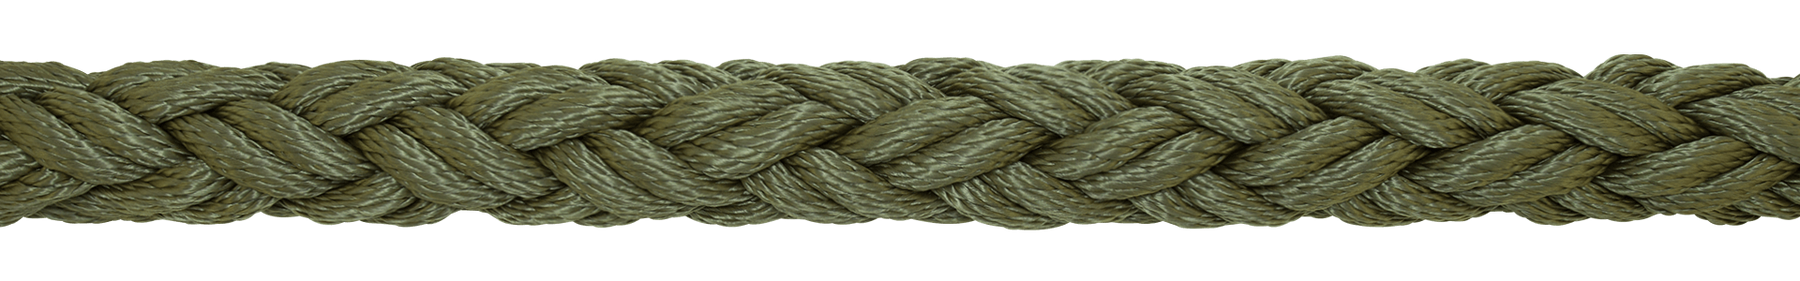 Southern Ropes' Fast Rope